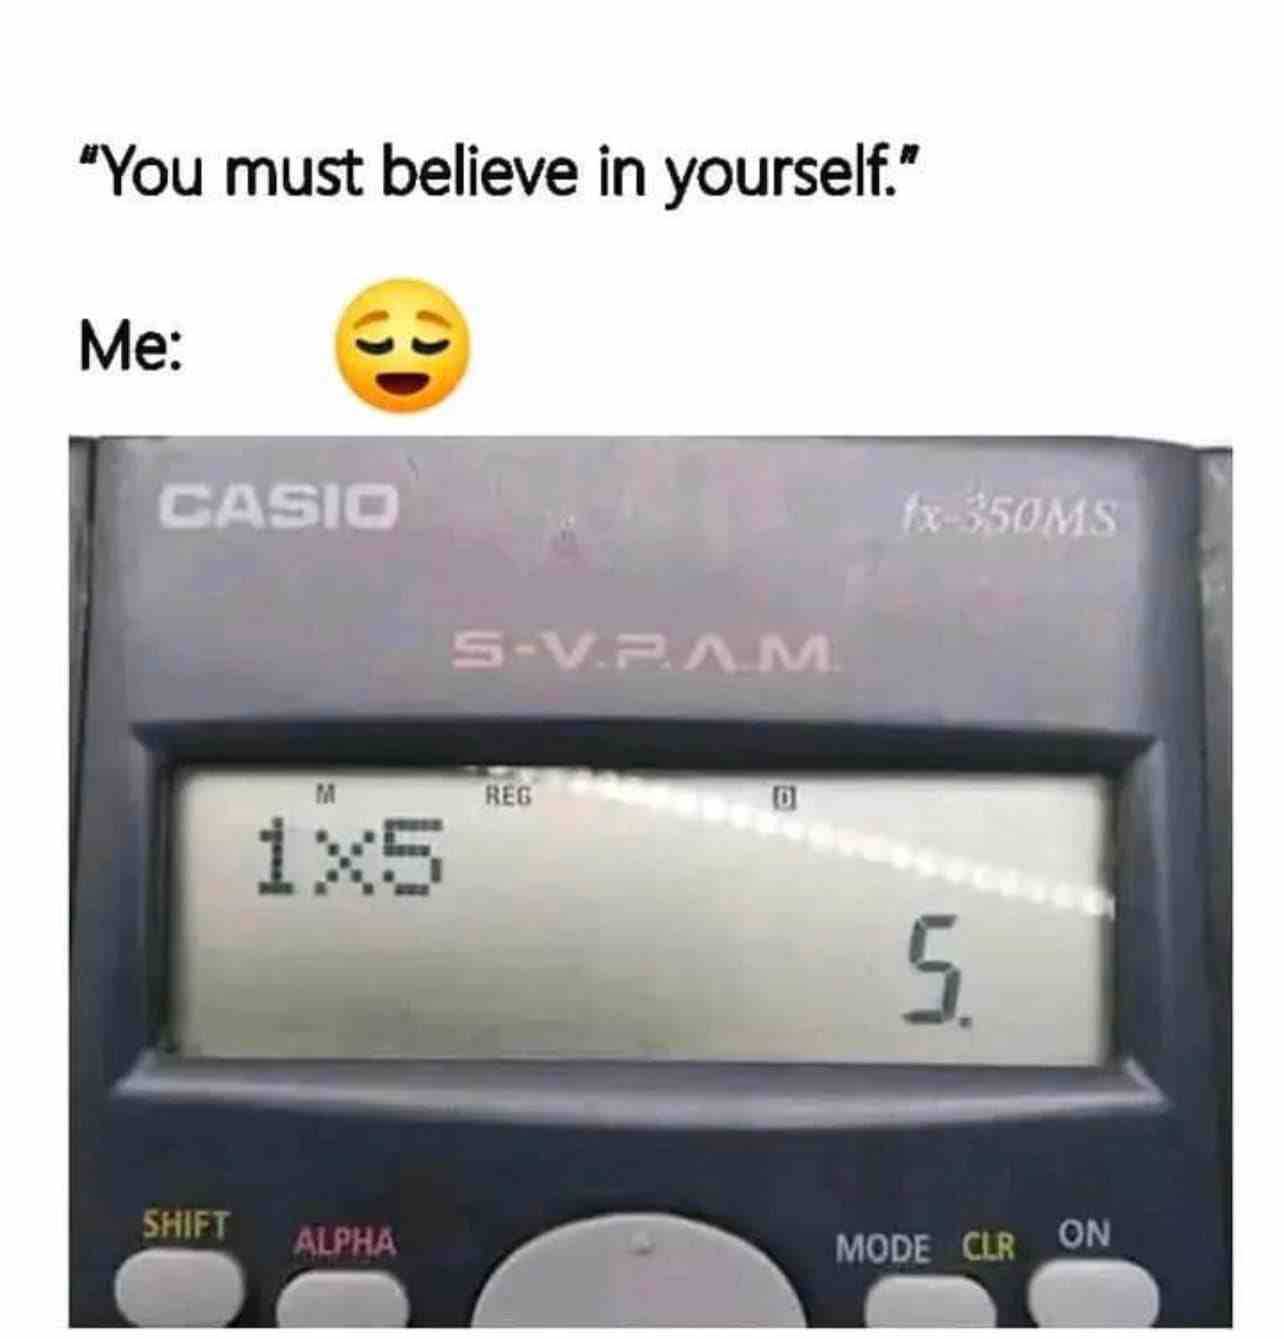 You must believe in yourself